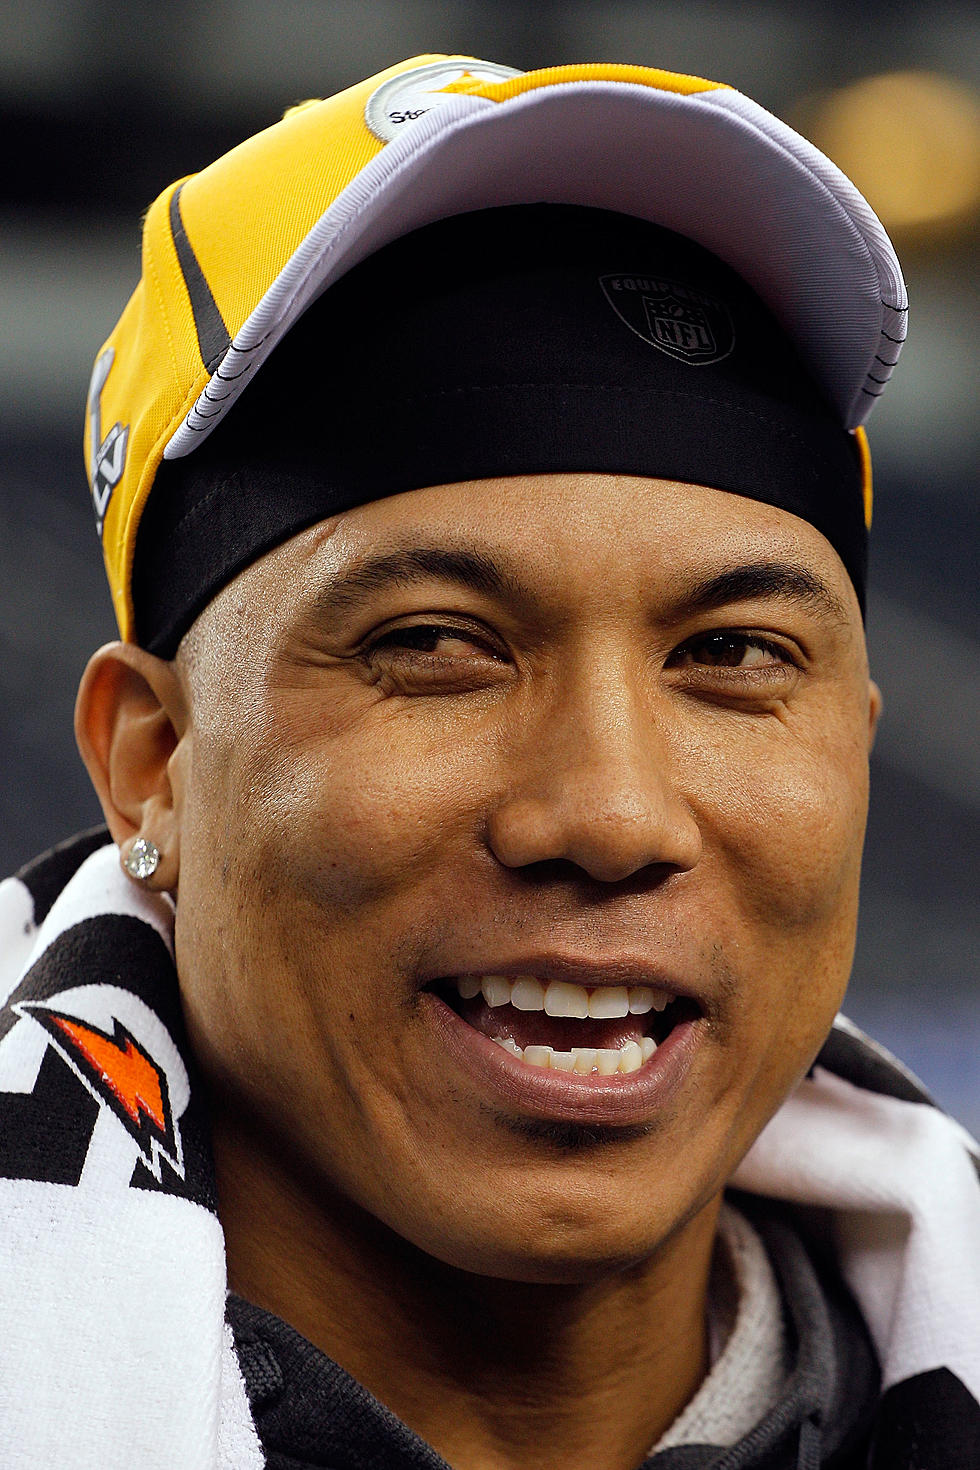 NFL Star Hines Ward Handcuffed in Los Angeles